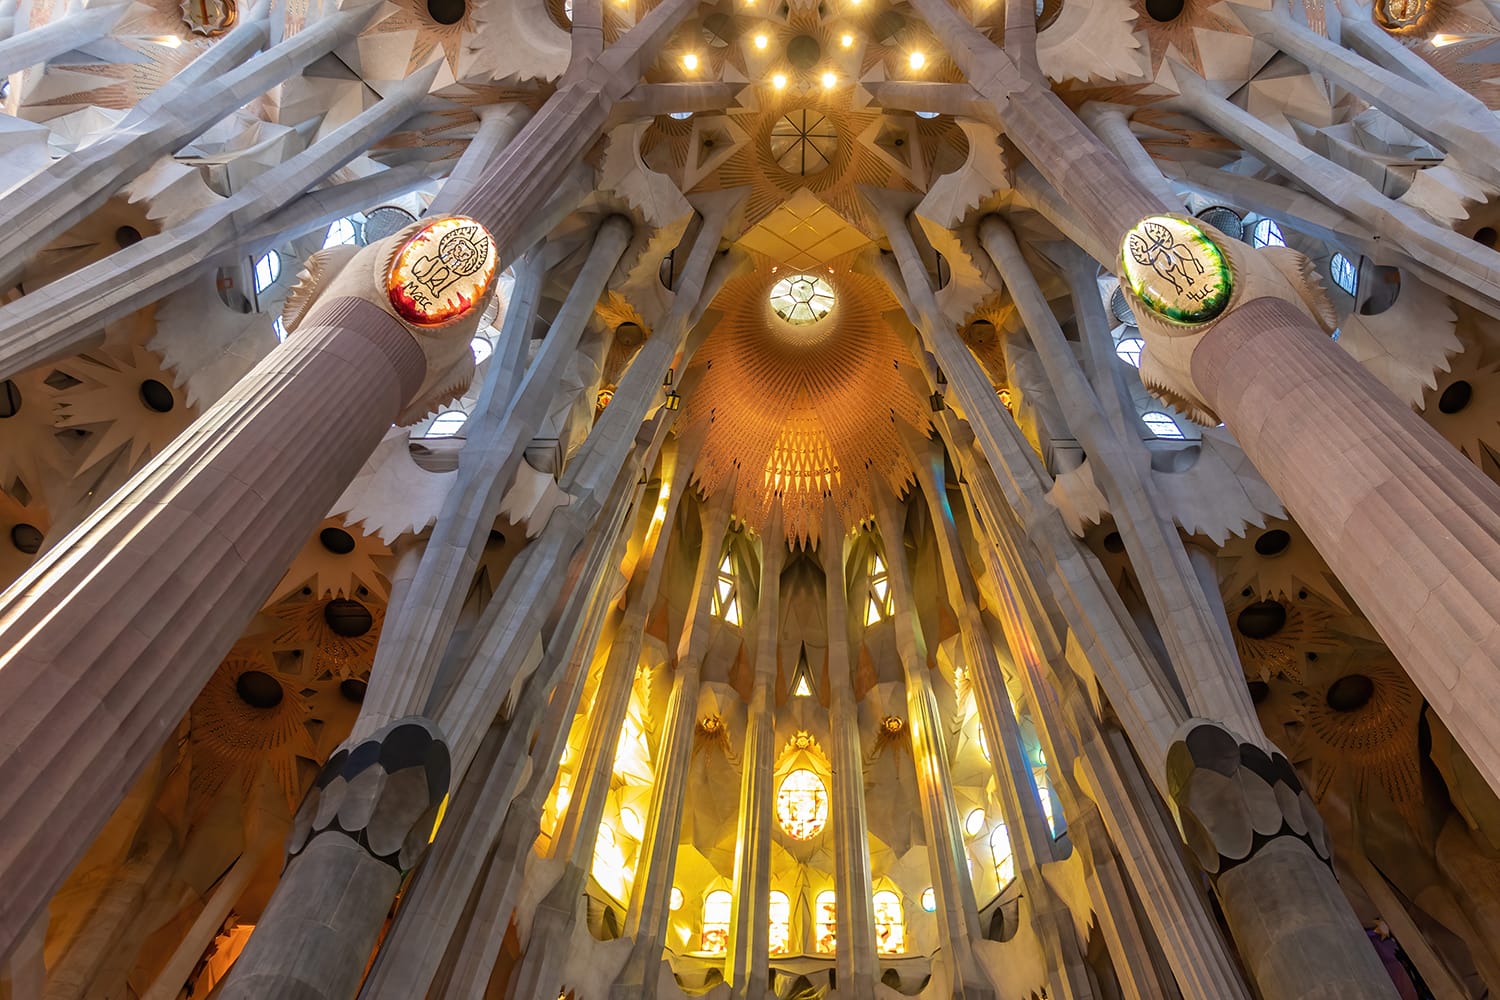 Dome and Lights coming through the stained glass windows inside "La Sagrada Familia", cathedral designed by Gaudi in Barcelona, Spain